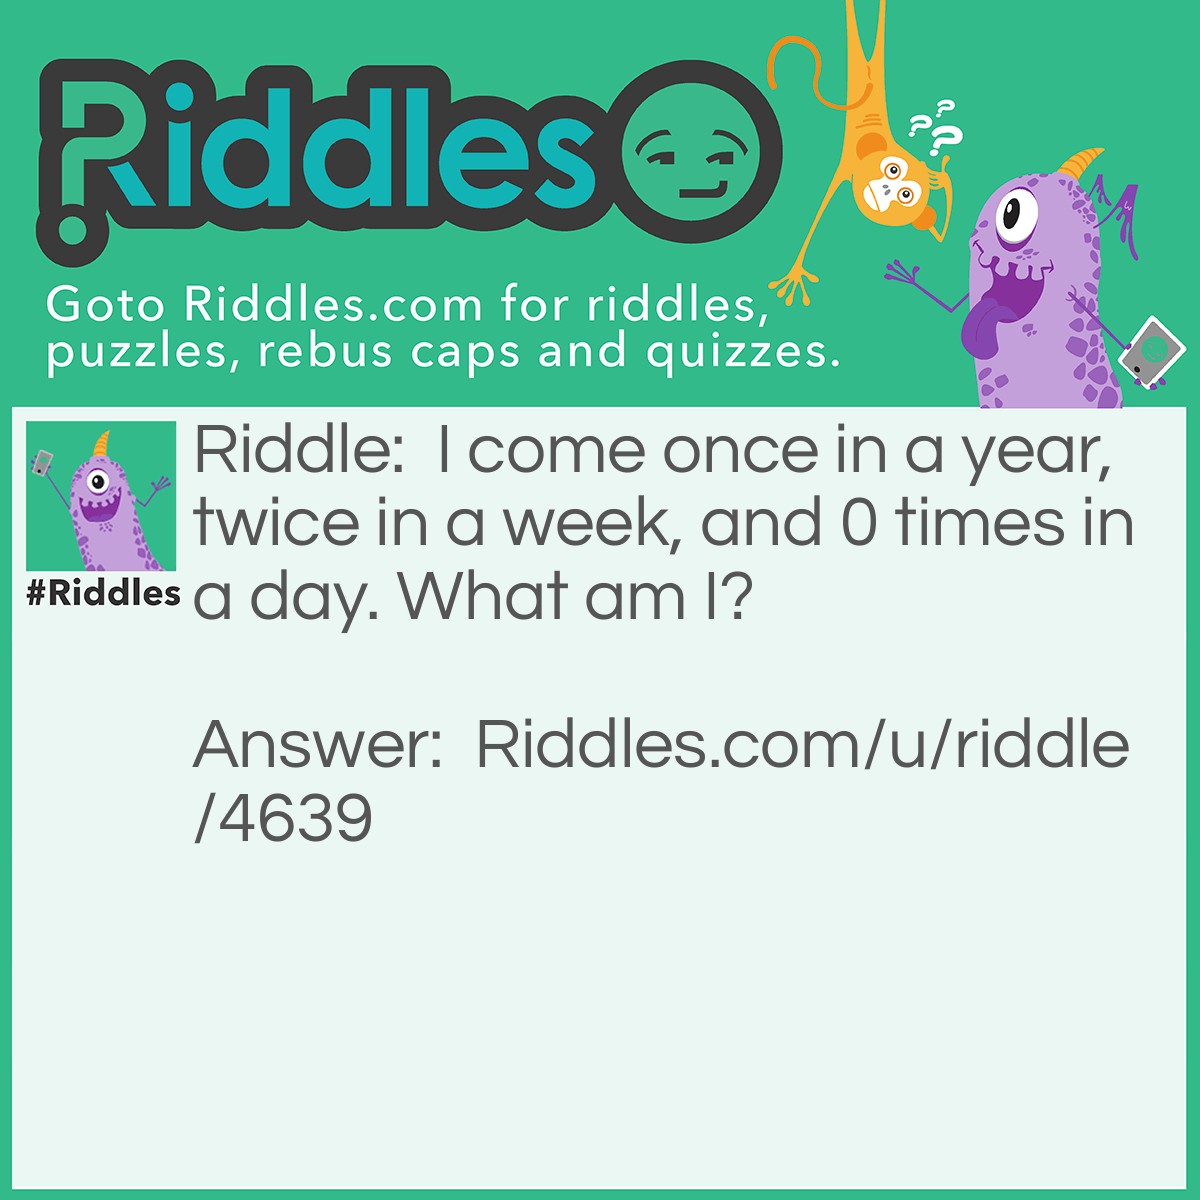 Riddle: I come once in a year, twice in a week, and 0 times in a day. What am I? Answer: The letter E.